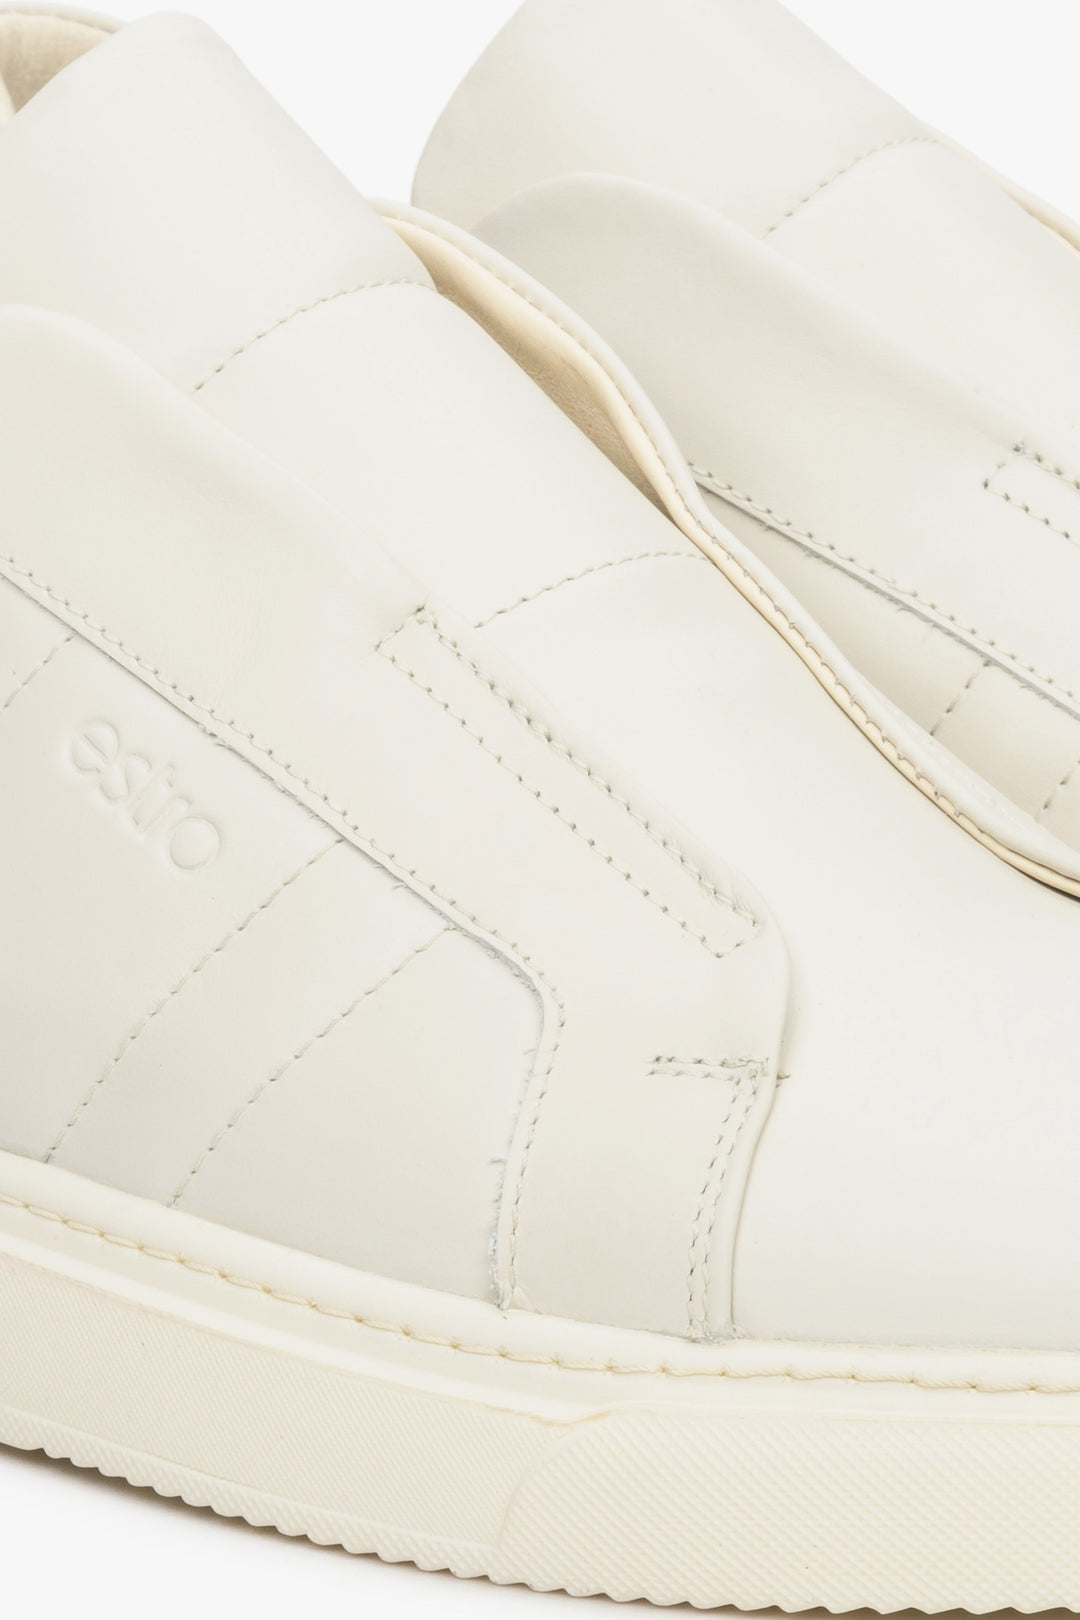 Men's beige slip-on sneakers by Estro for spring and fall - close-up of the details.